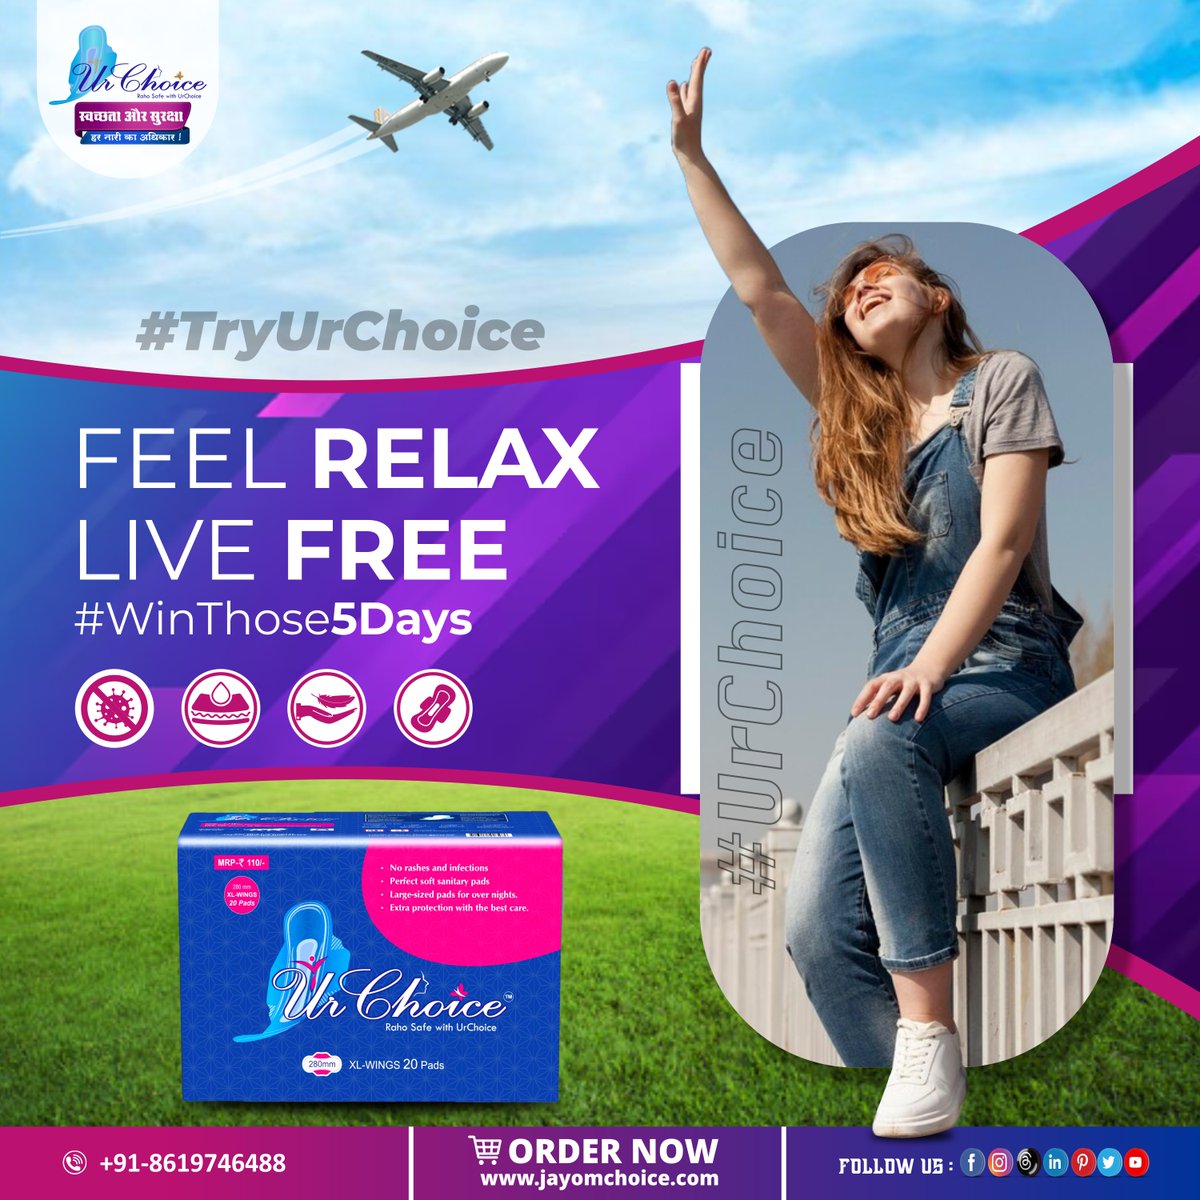 Feel relaxed, live free! Experience ultimate comfort and freedom with Ur Choice. Embrace every moment, every day of the month.
Order Now : jayomchoice.com
#StayPrepared #urchoice #PeriodProtection #leakagefree #comfort #Absorption #WomenEmpowerment #Period #SanitaryPads